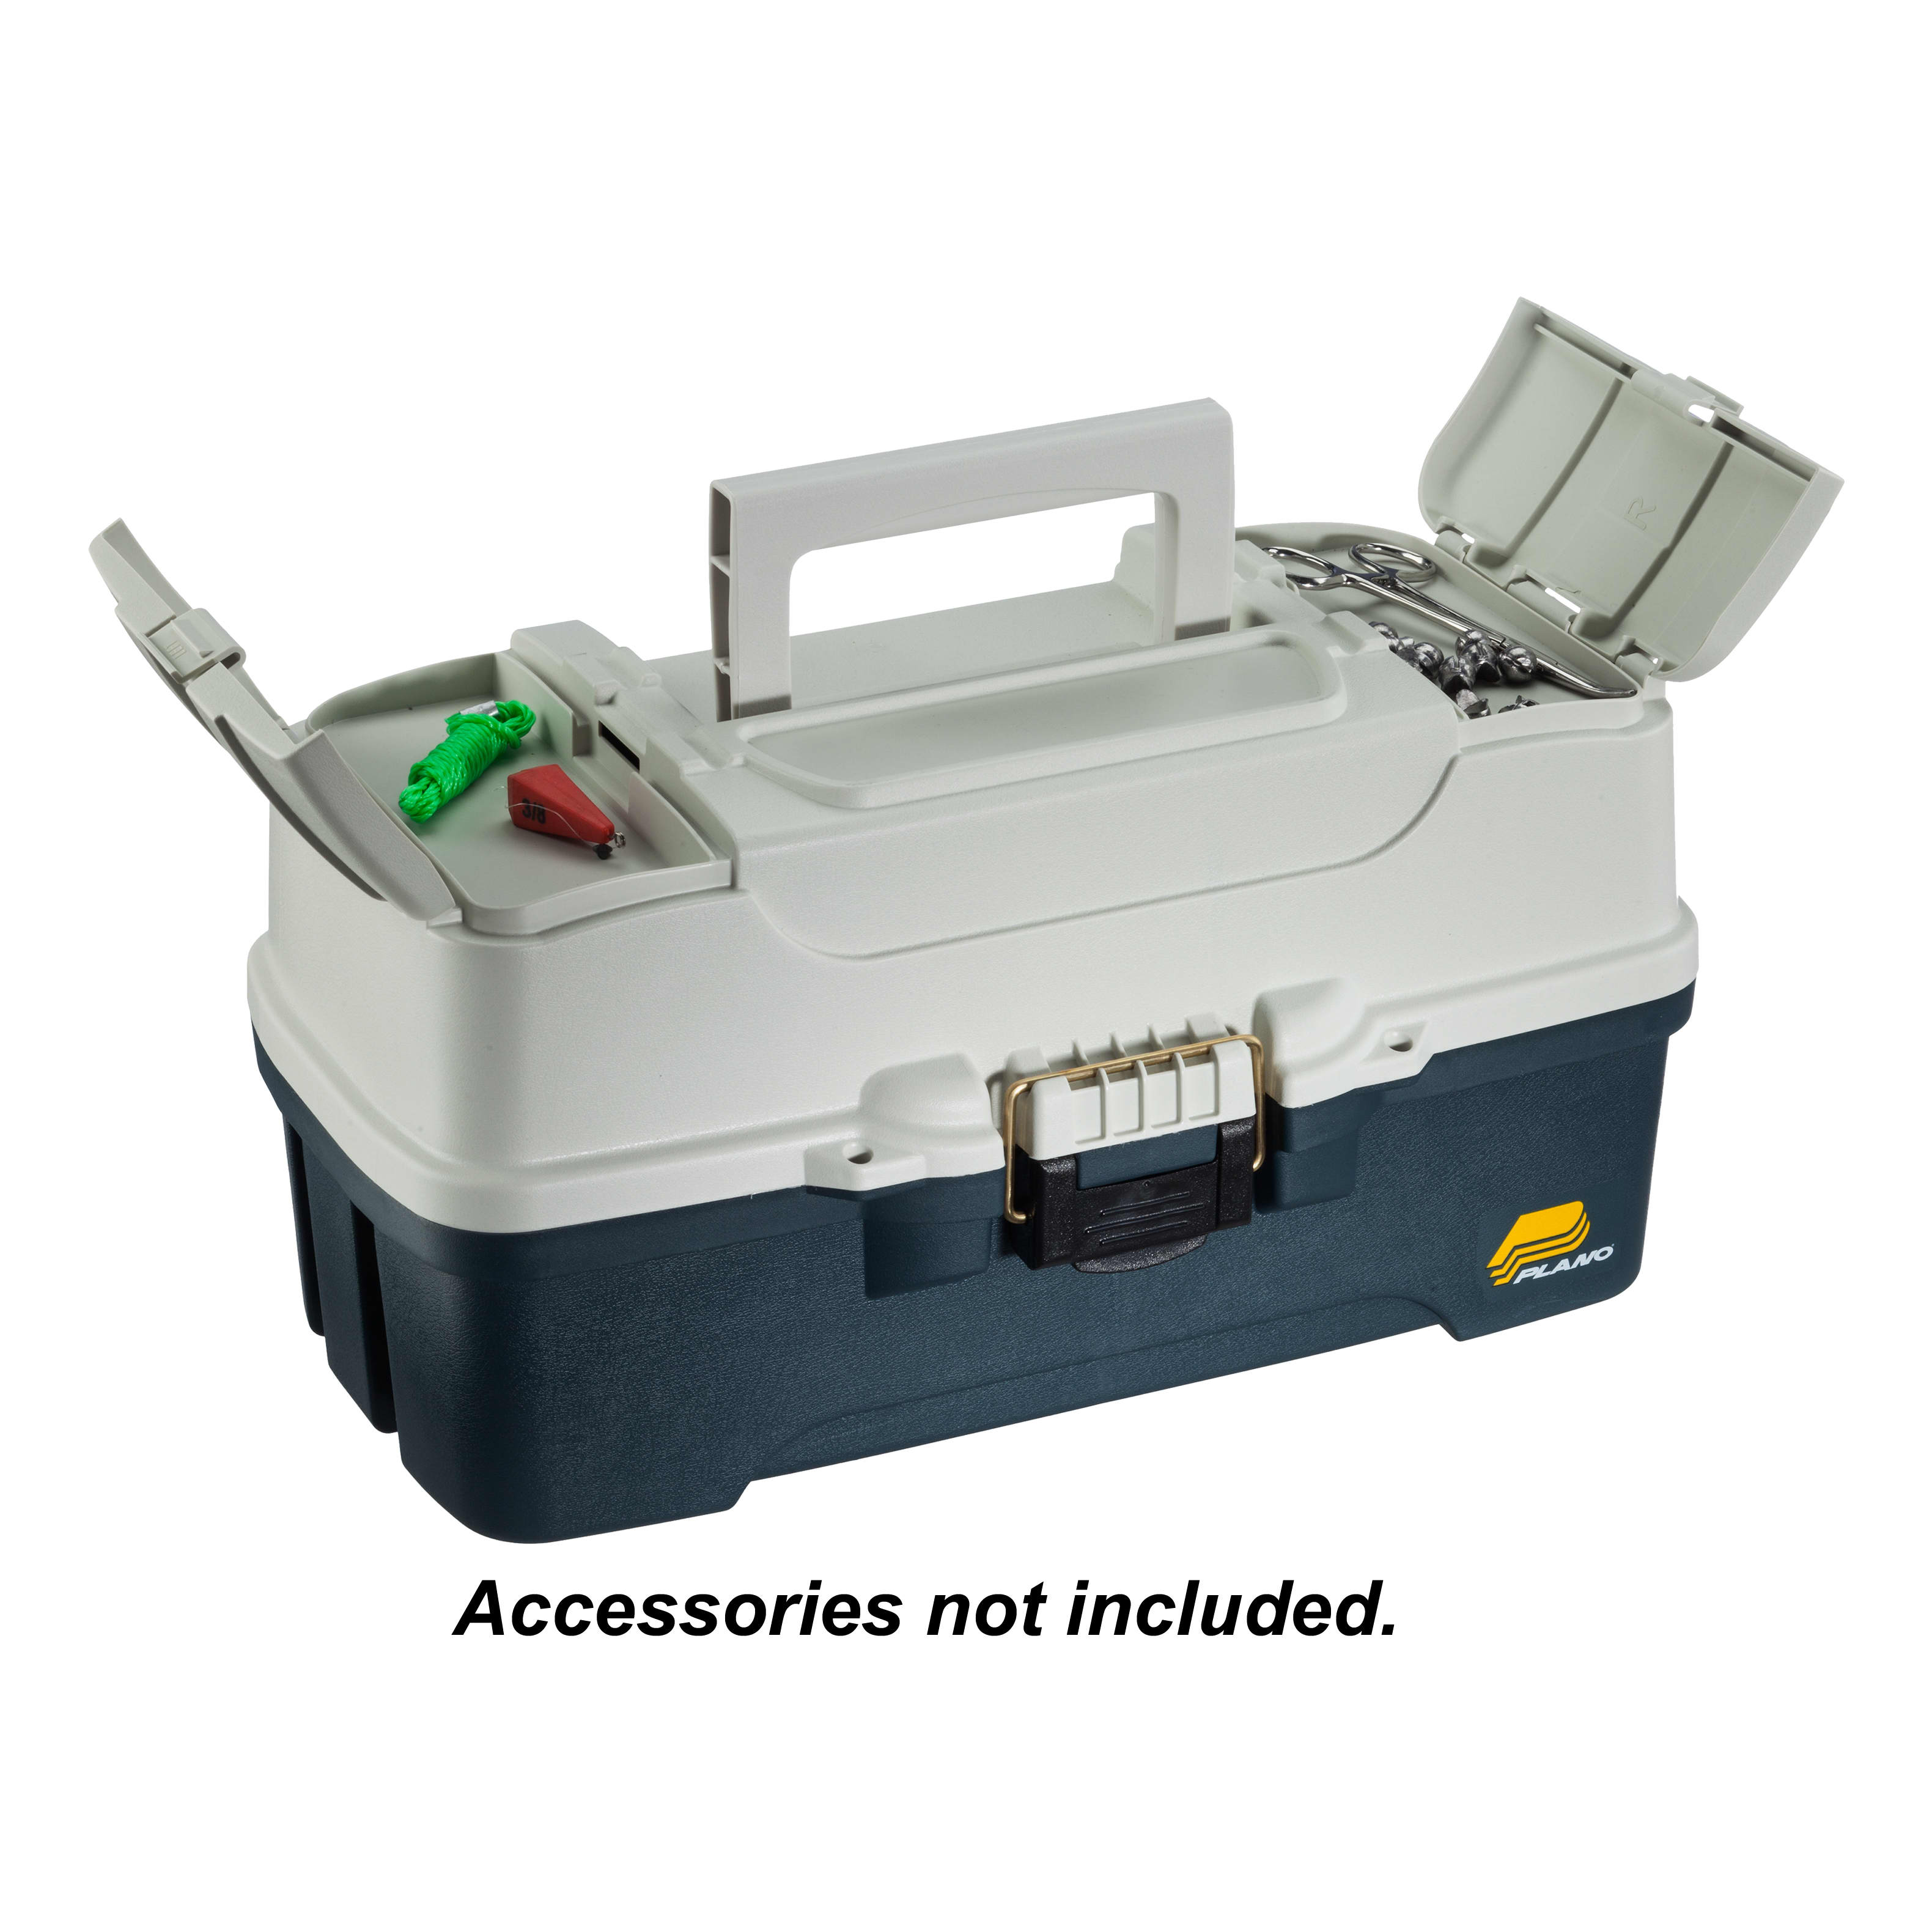 Plano 3-Tray Tackle Box - Top Compartments Open View